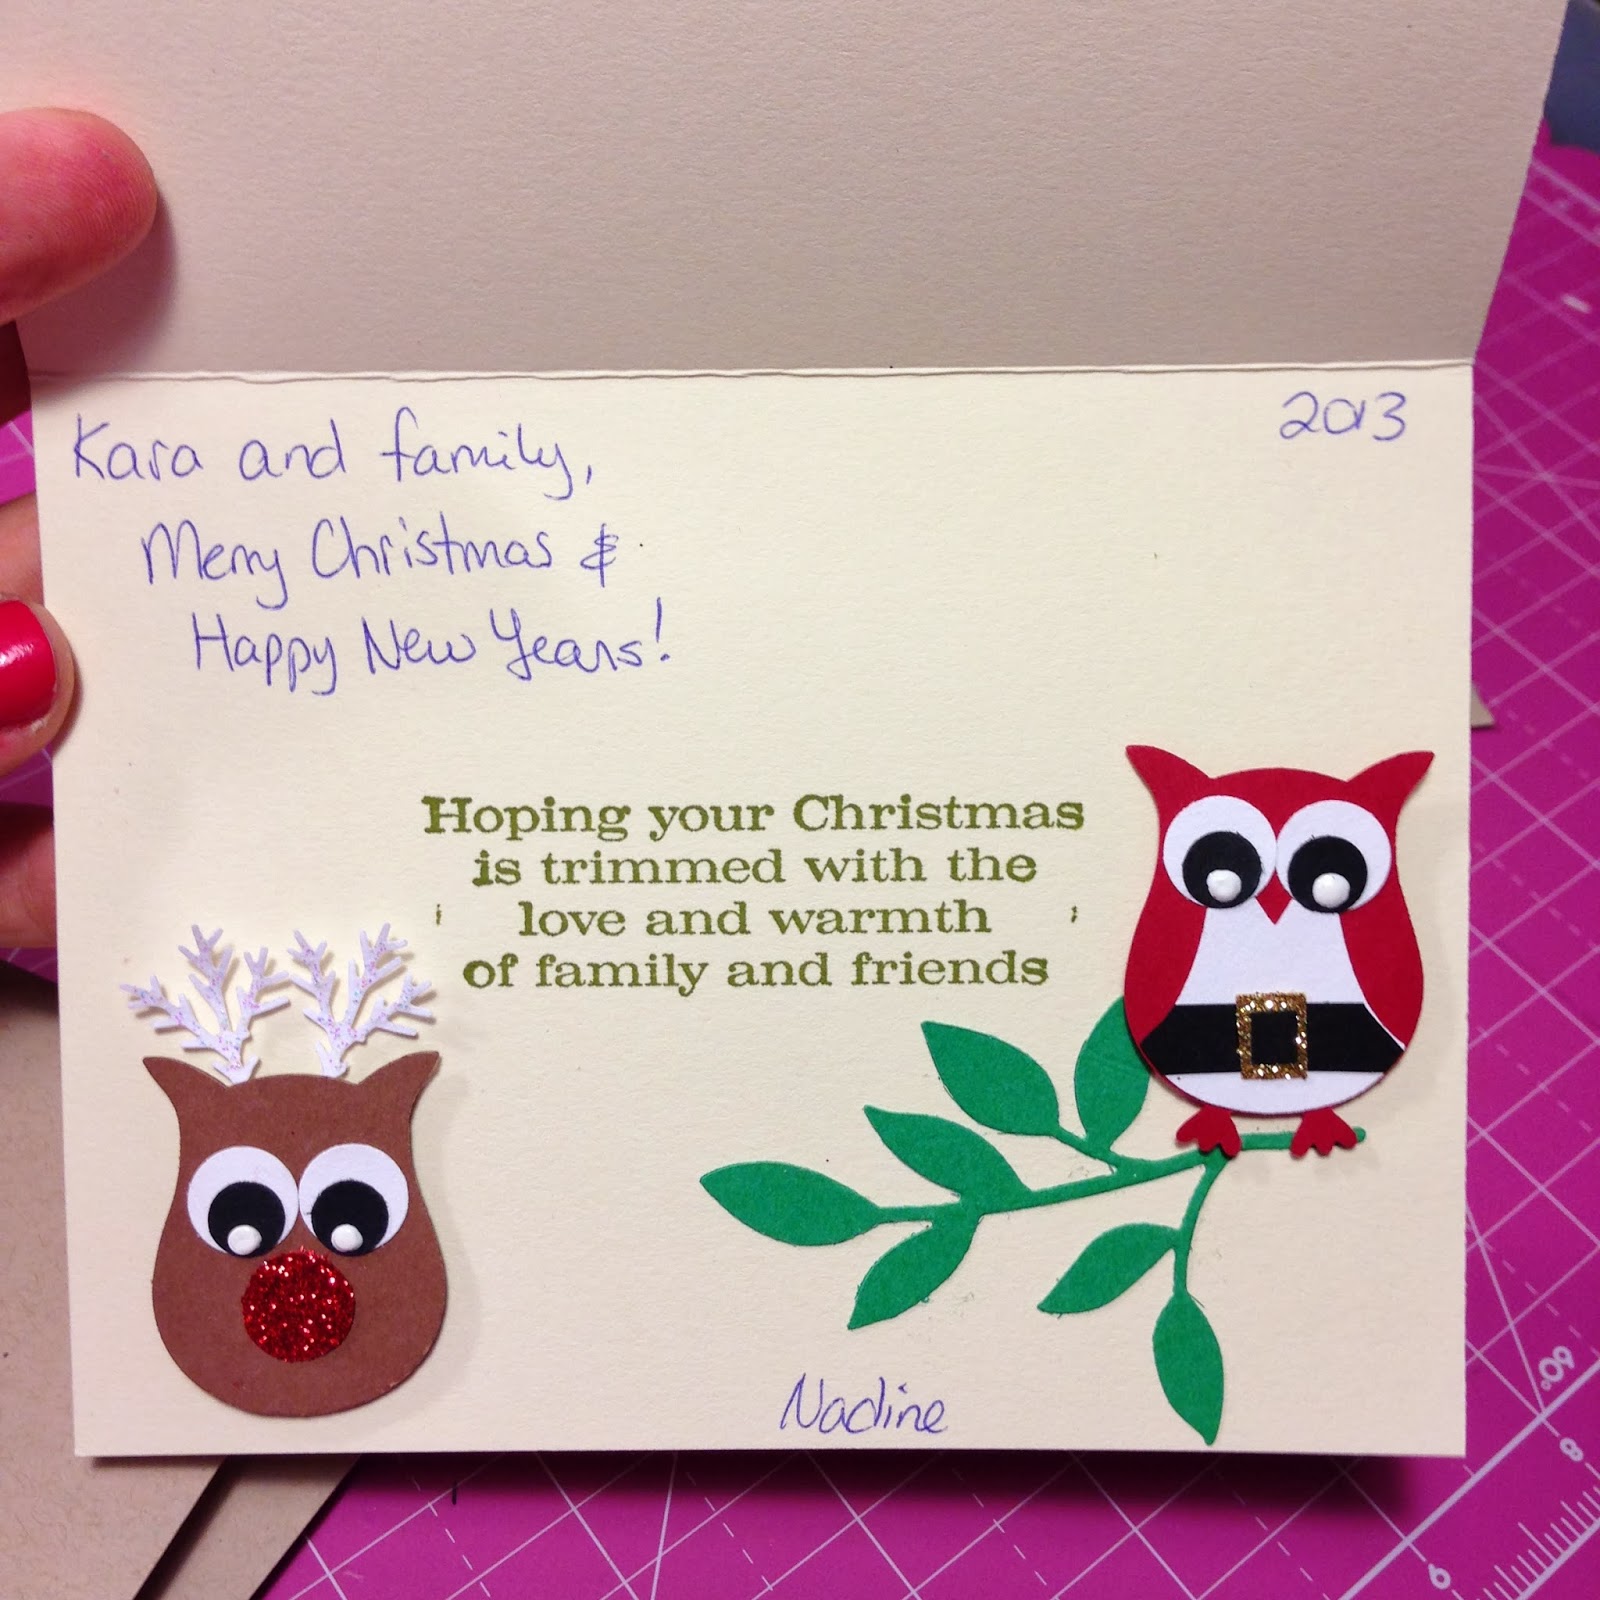 pumpkin-spice-everything-nice-a-christmas-card-for-my-boss